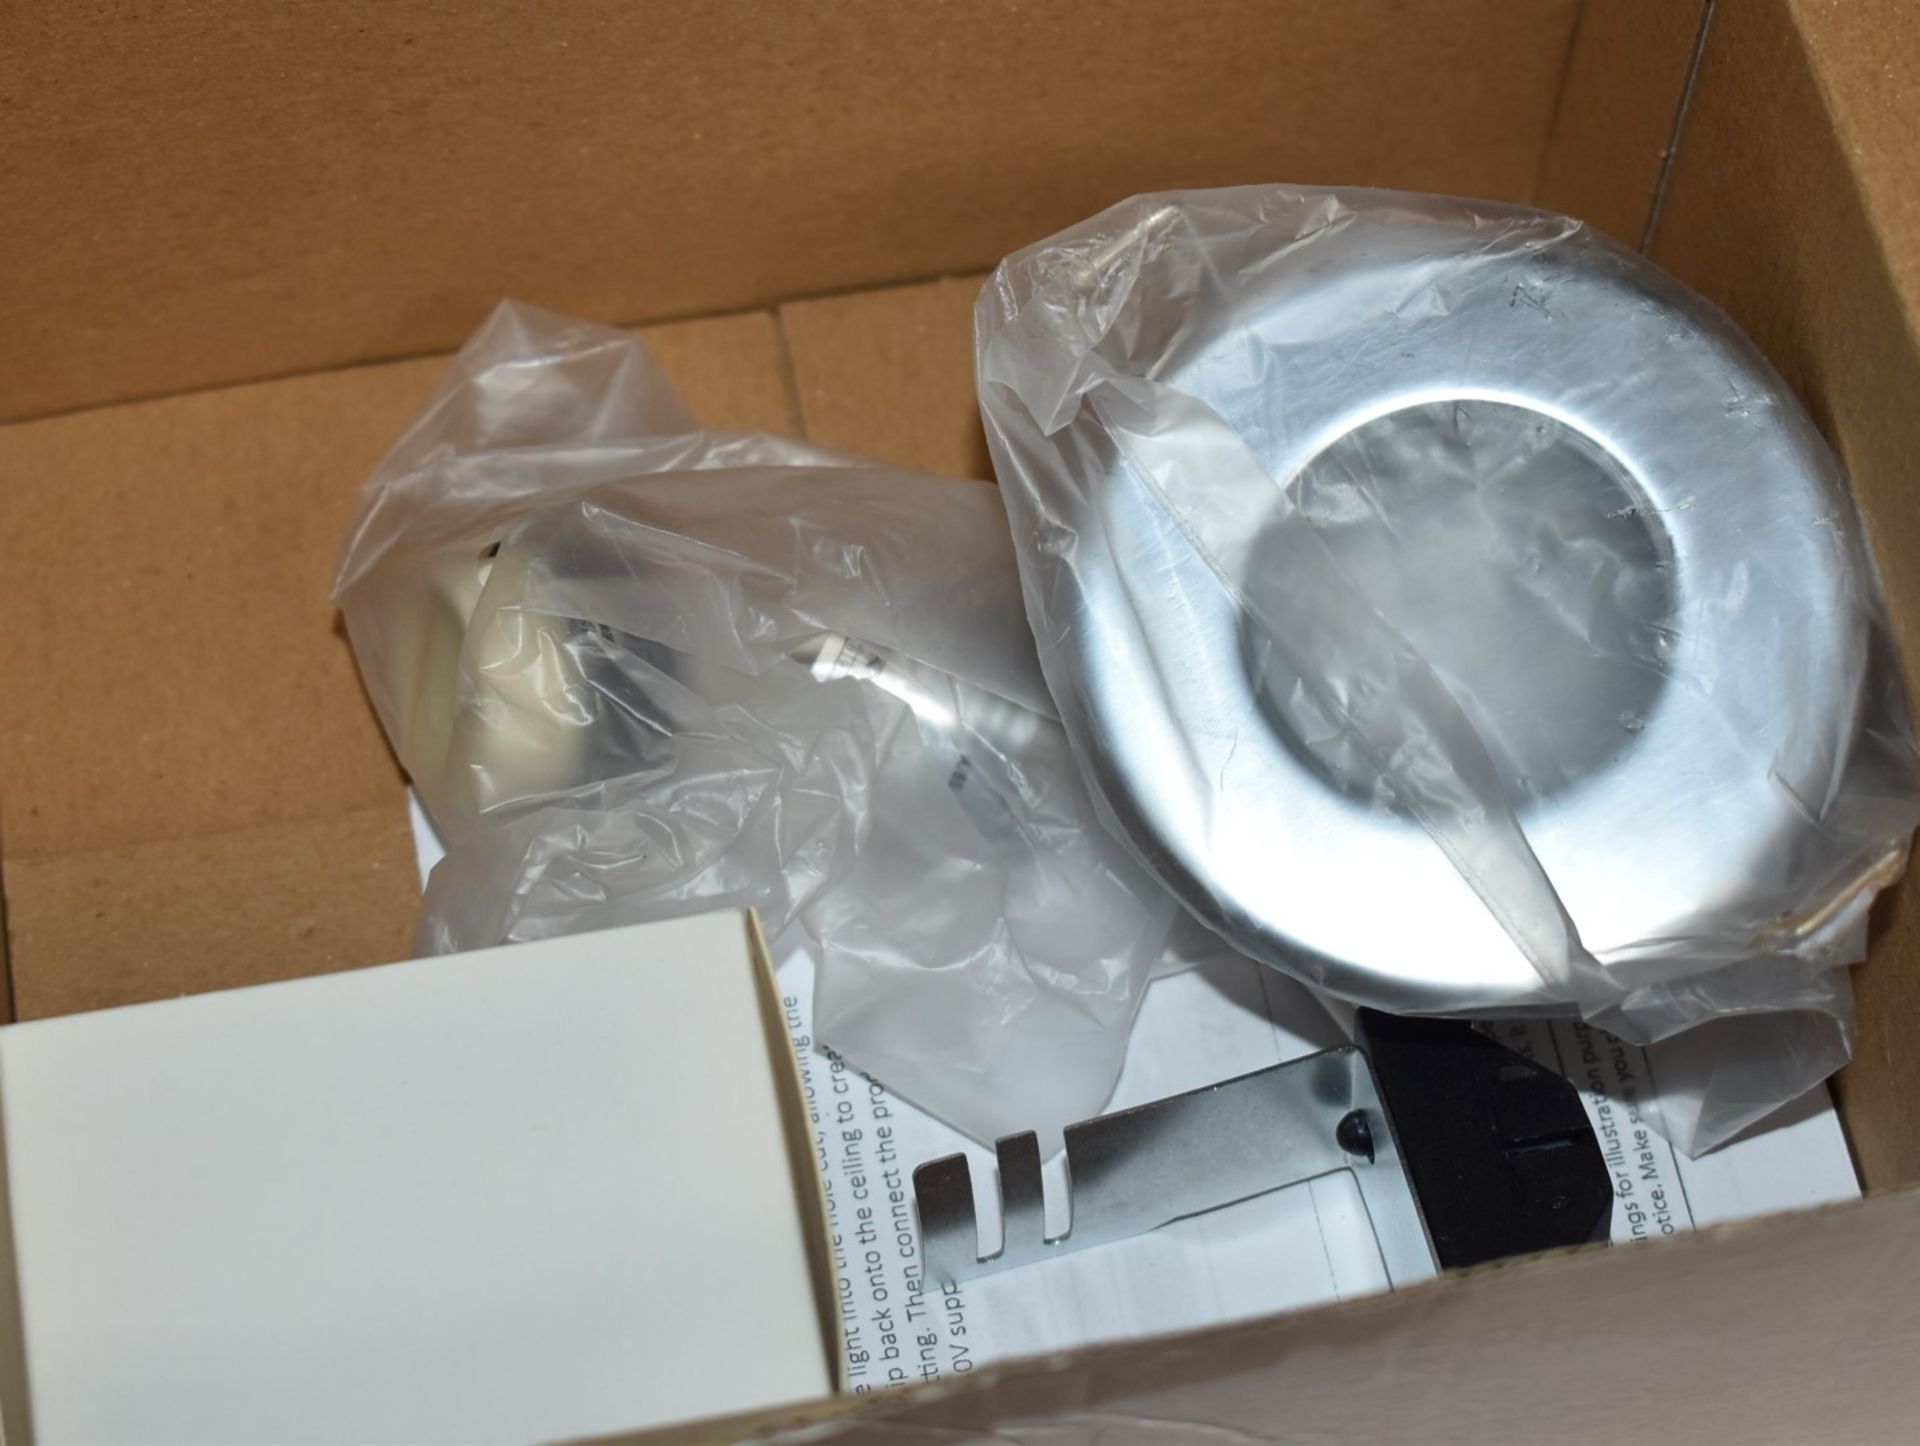 1 x Chrome Shower Light With Warm White LED Lamp - Unused Boxed Stock - CL011 - Ref: 62170 -